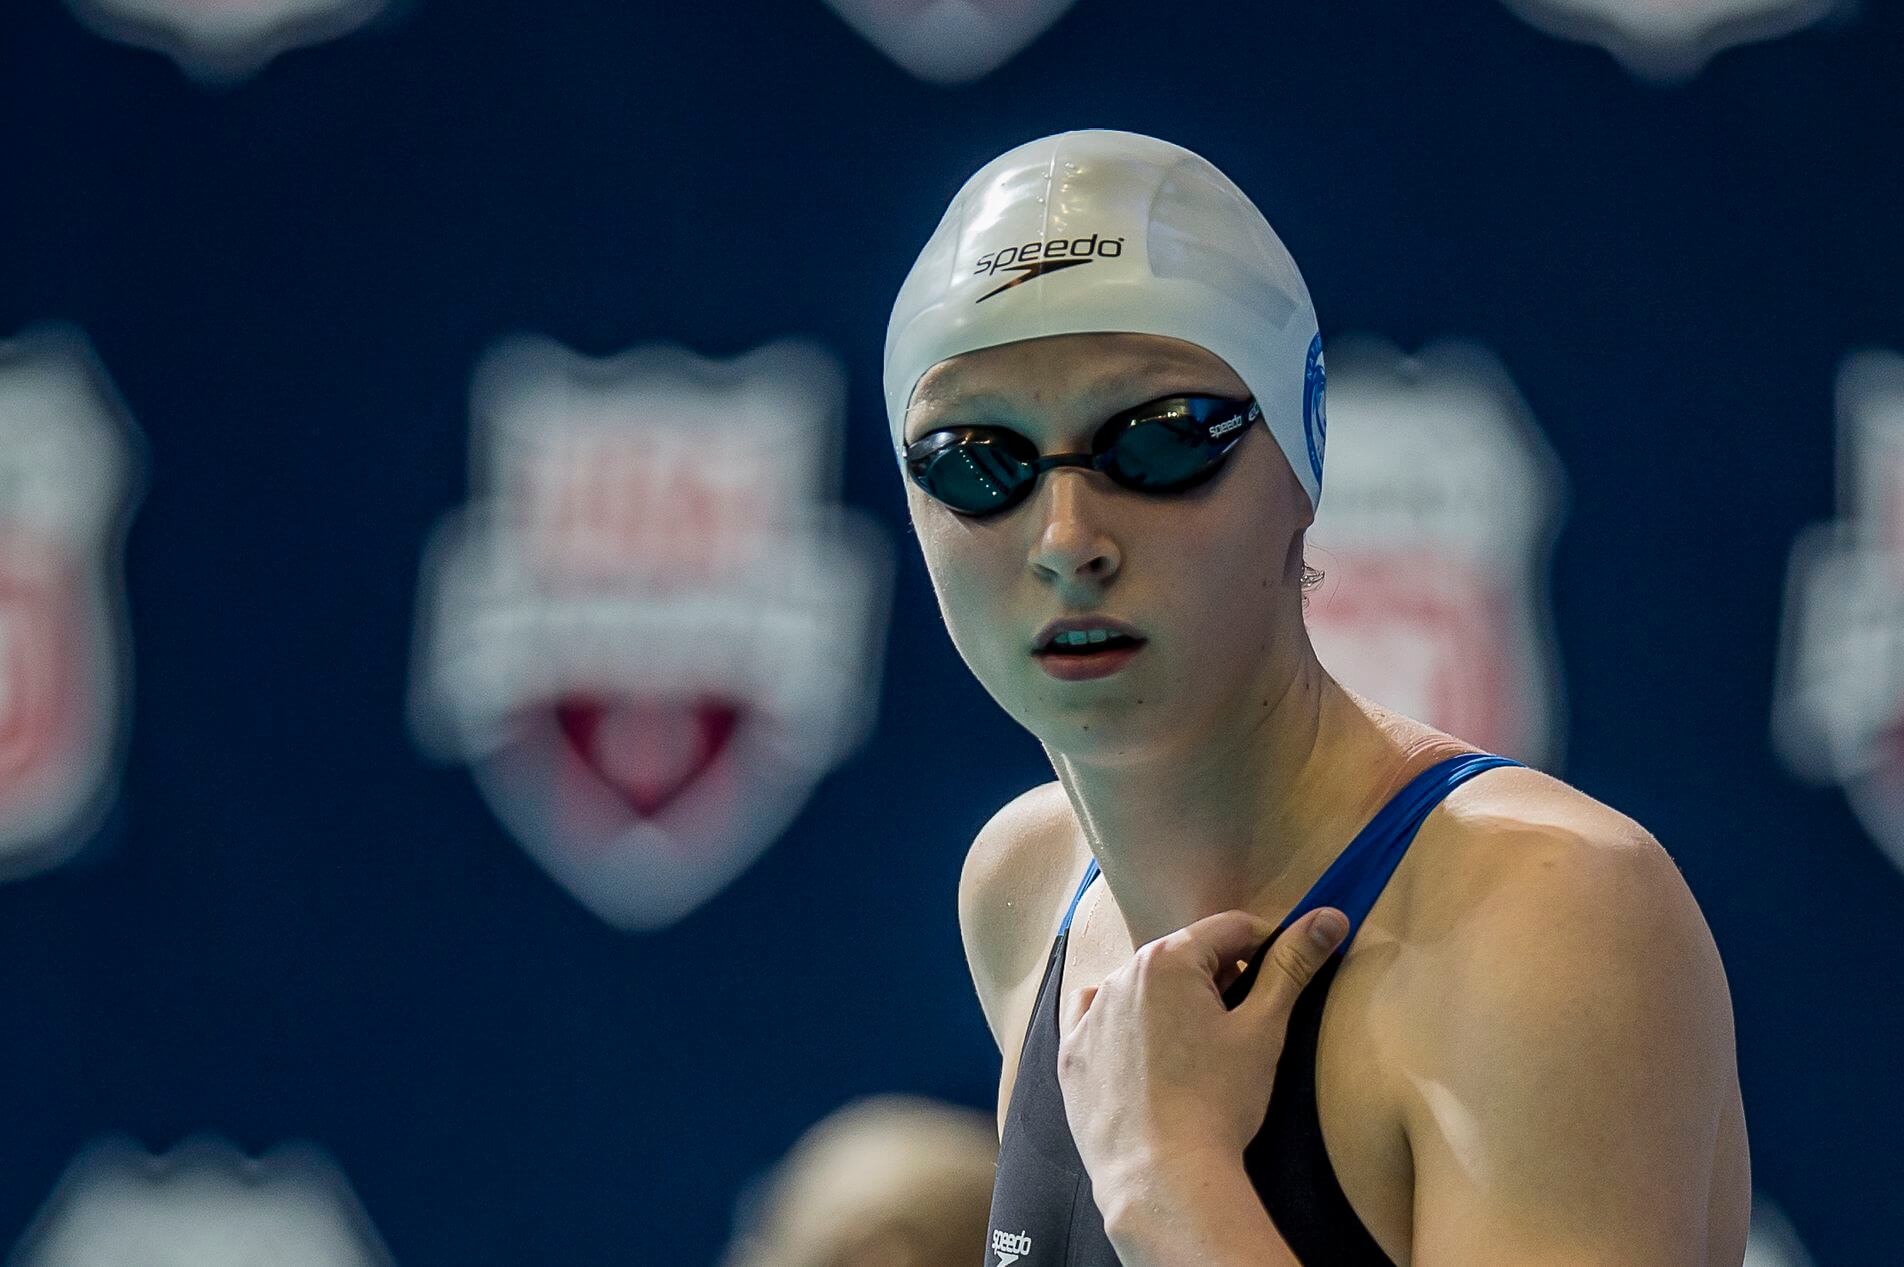 Video Katie Ledecky's National High School Record in 200 Freestyle